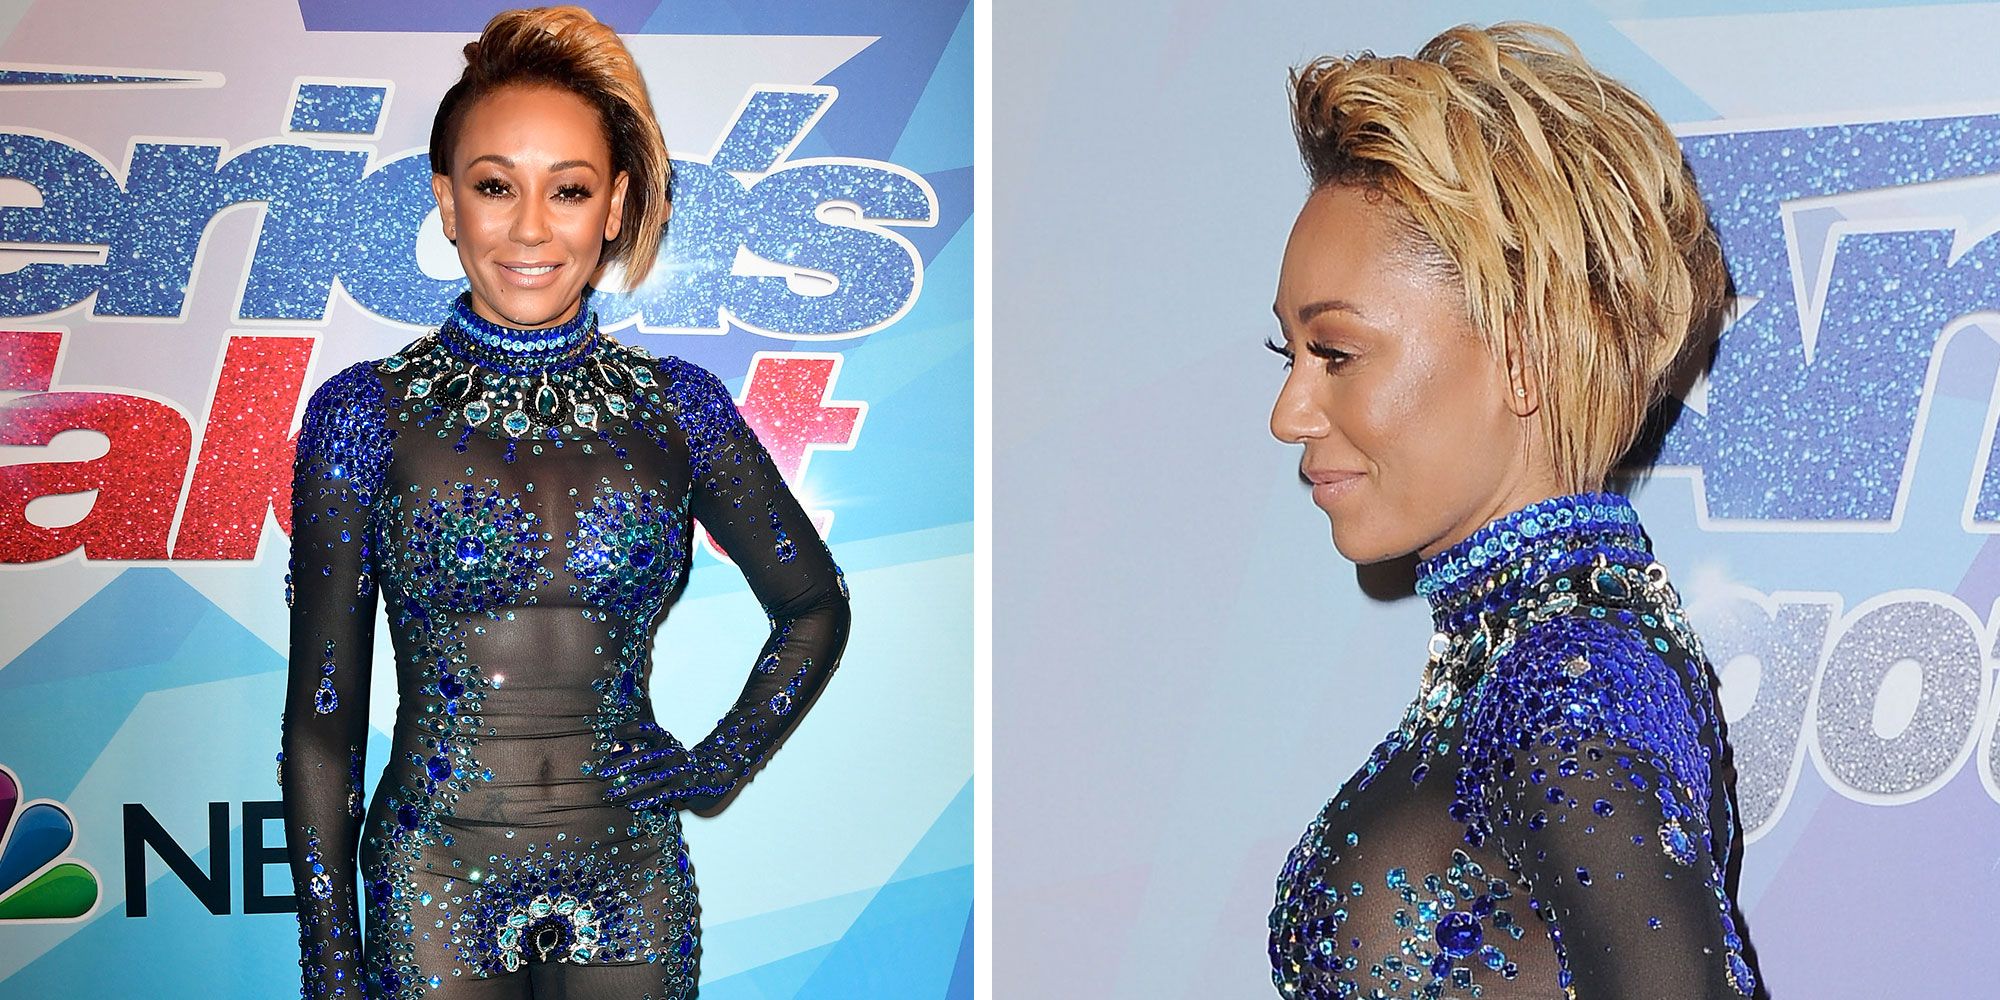 Mel B Went To Americas Got Talent Dressed As A Nearly Naked Superhero